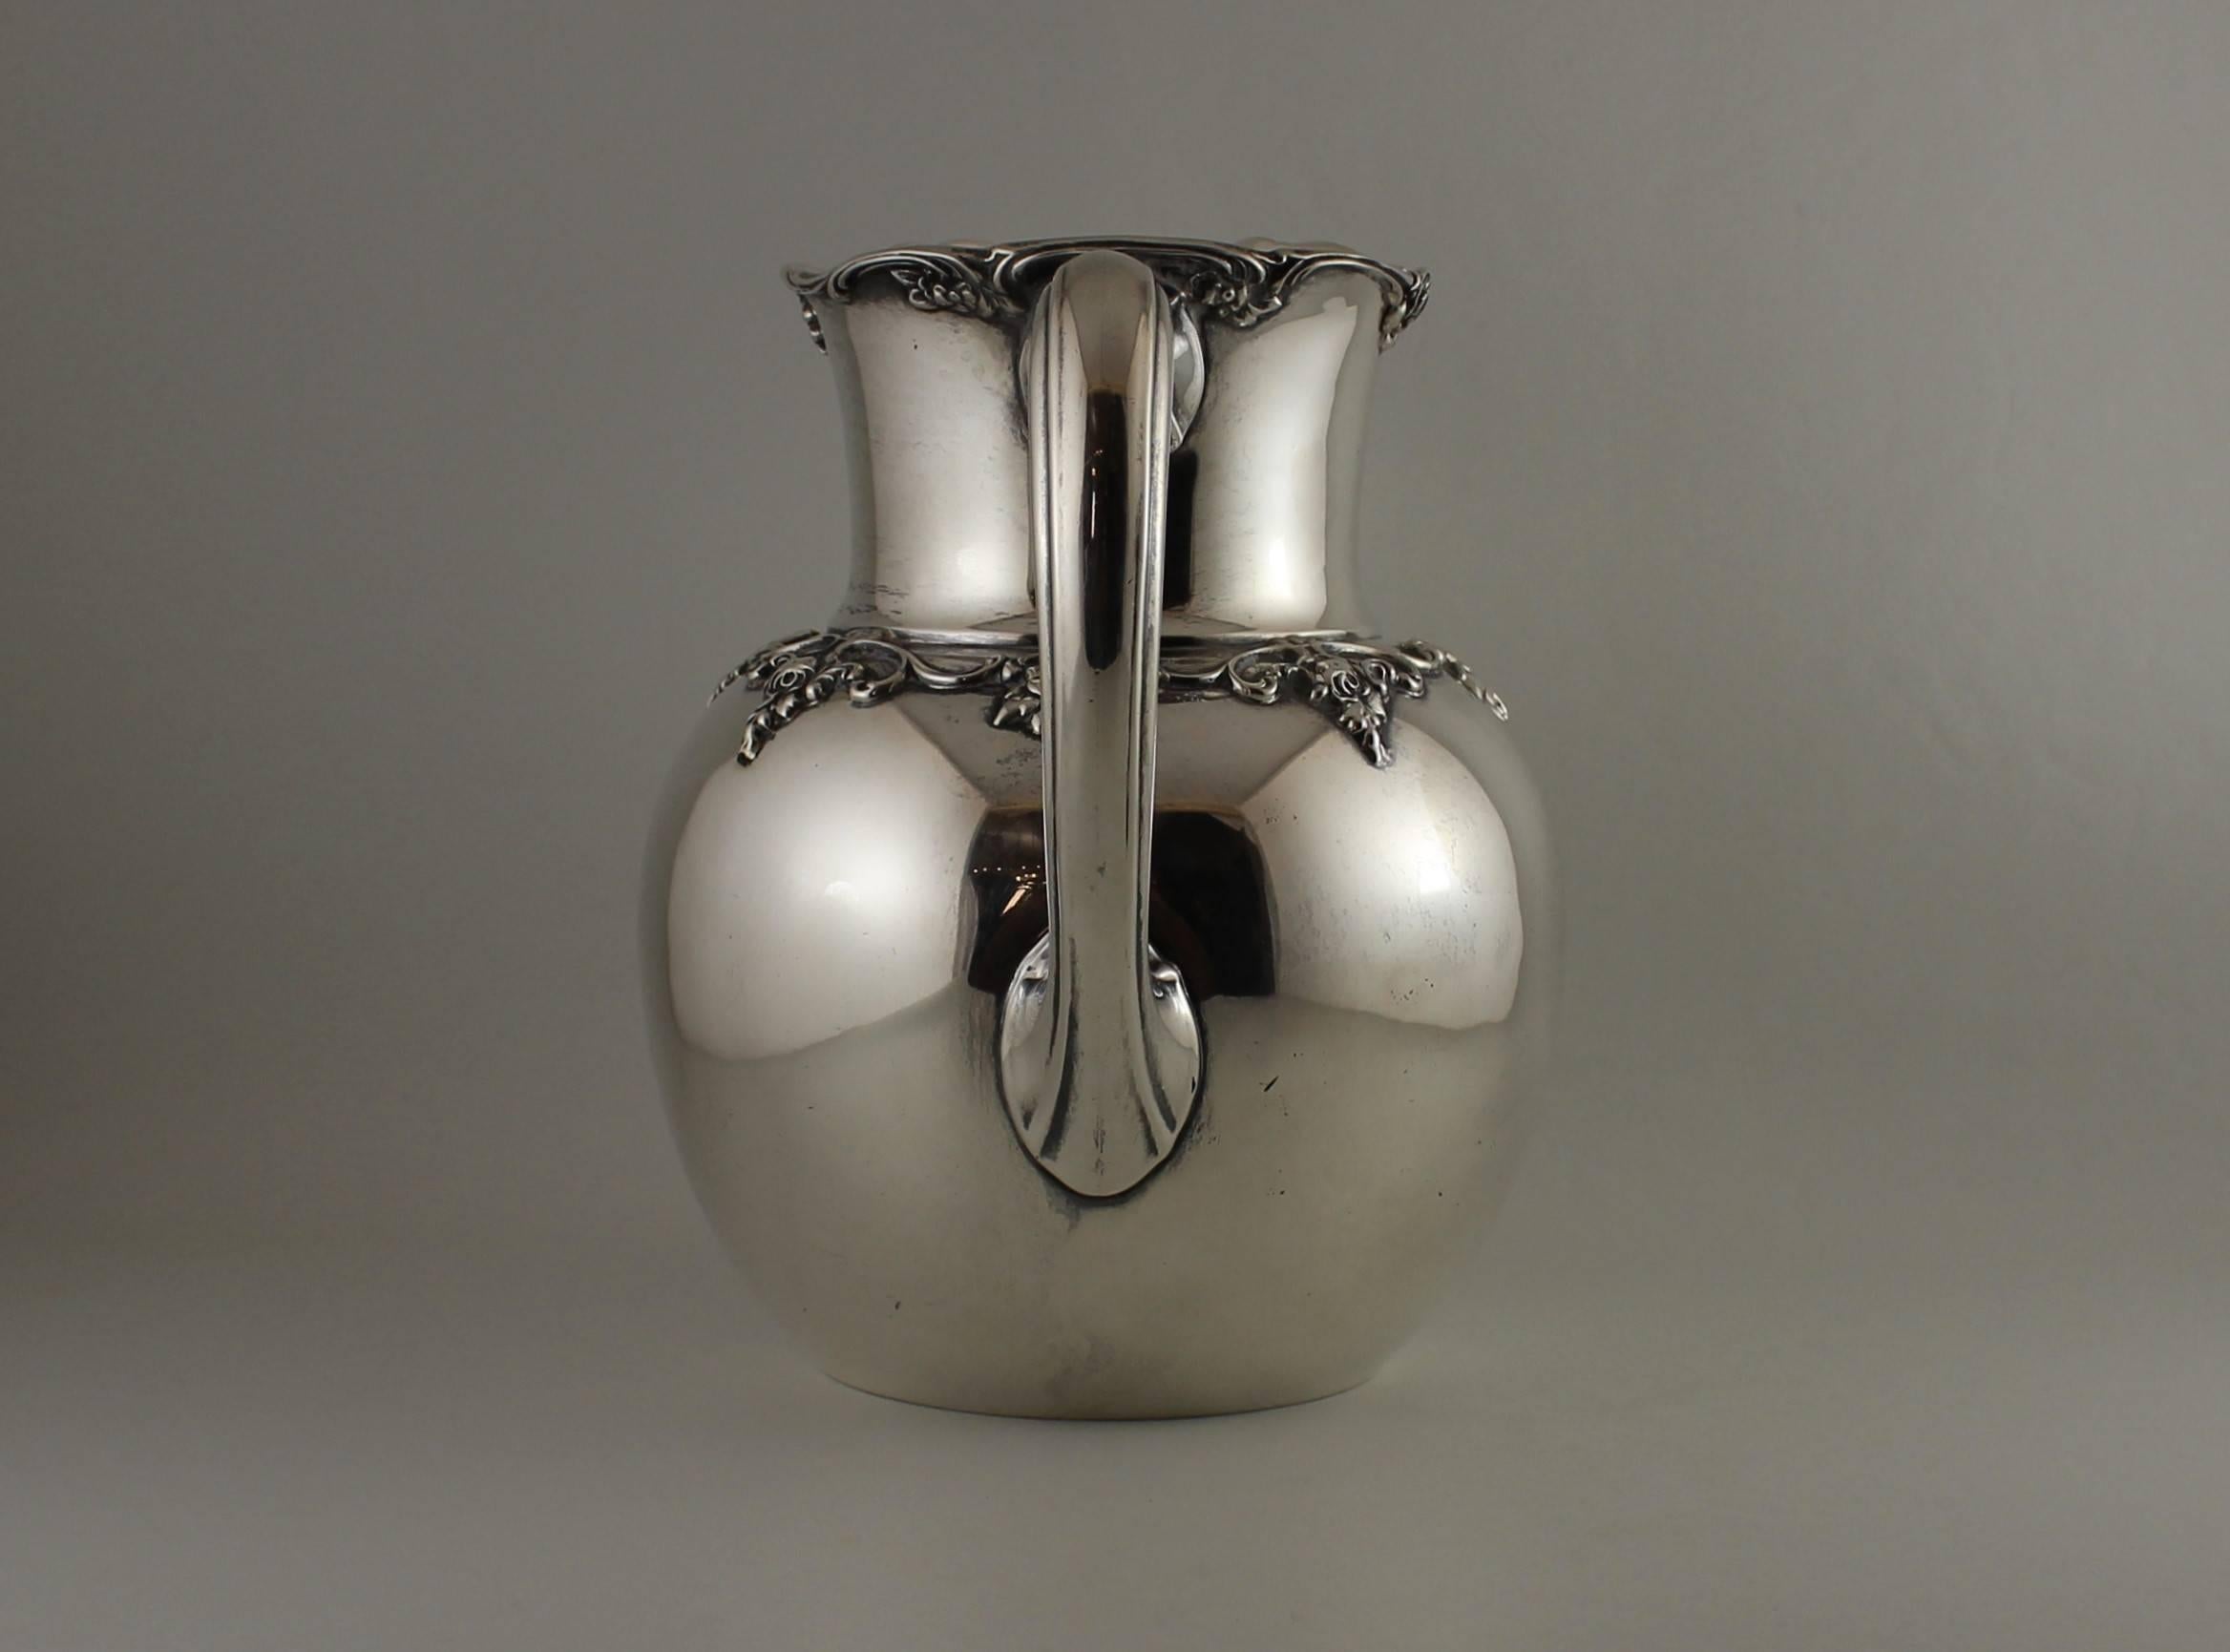 Gorham Sterling Silver Pitcher or Jug In Good Condition For Sale In Hamilton, Ontario